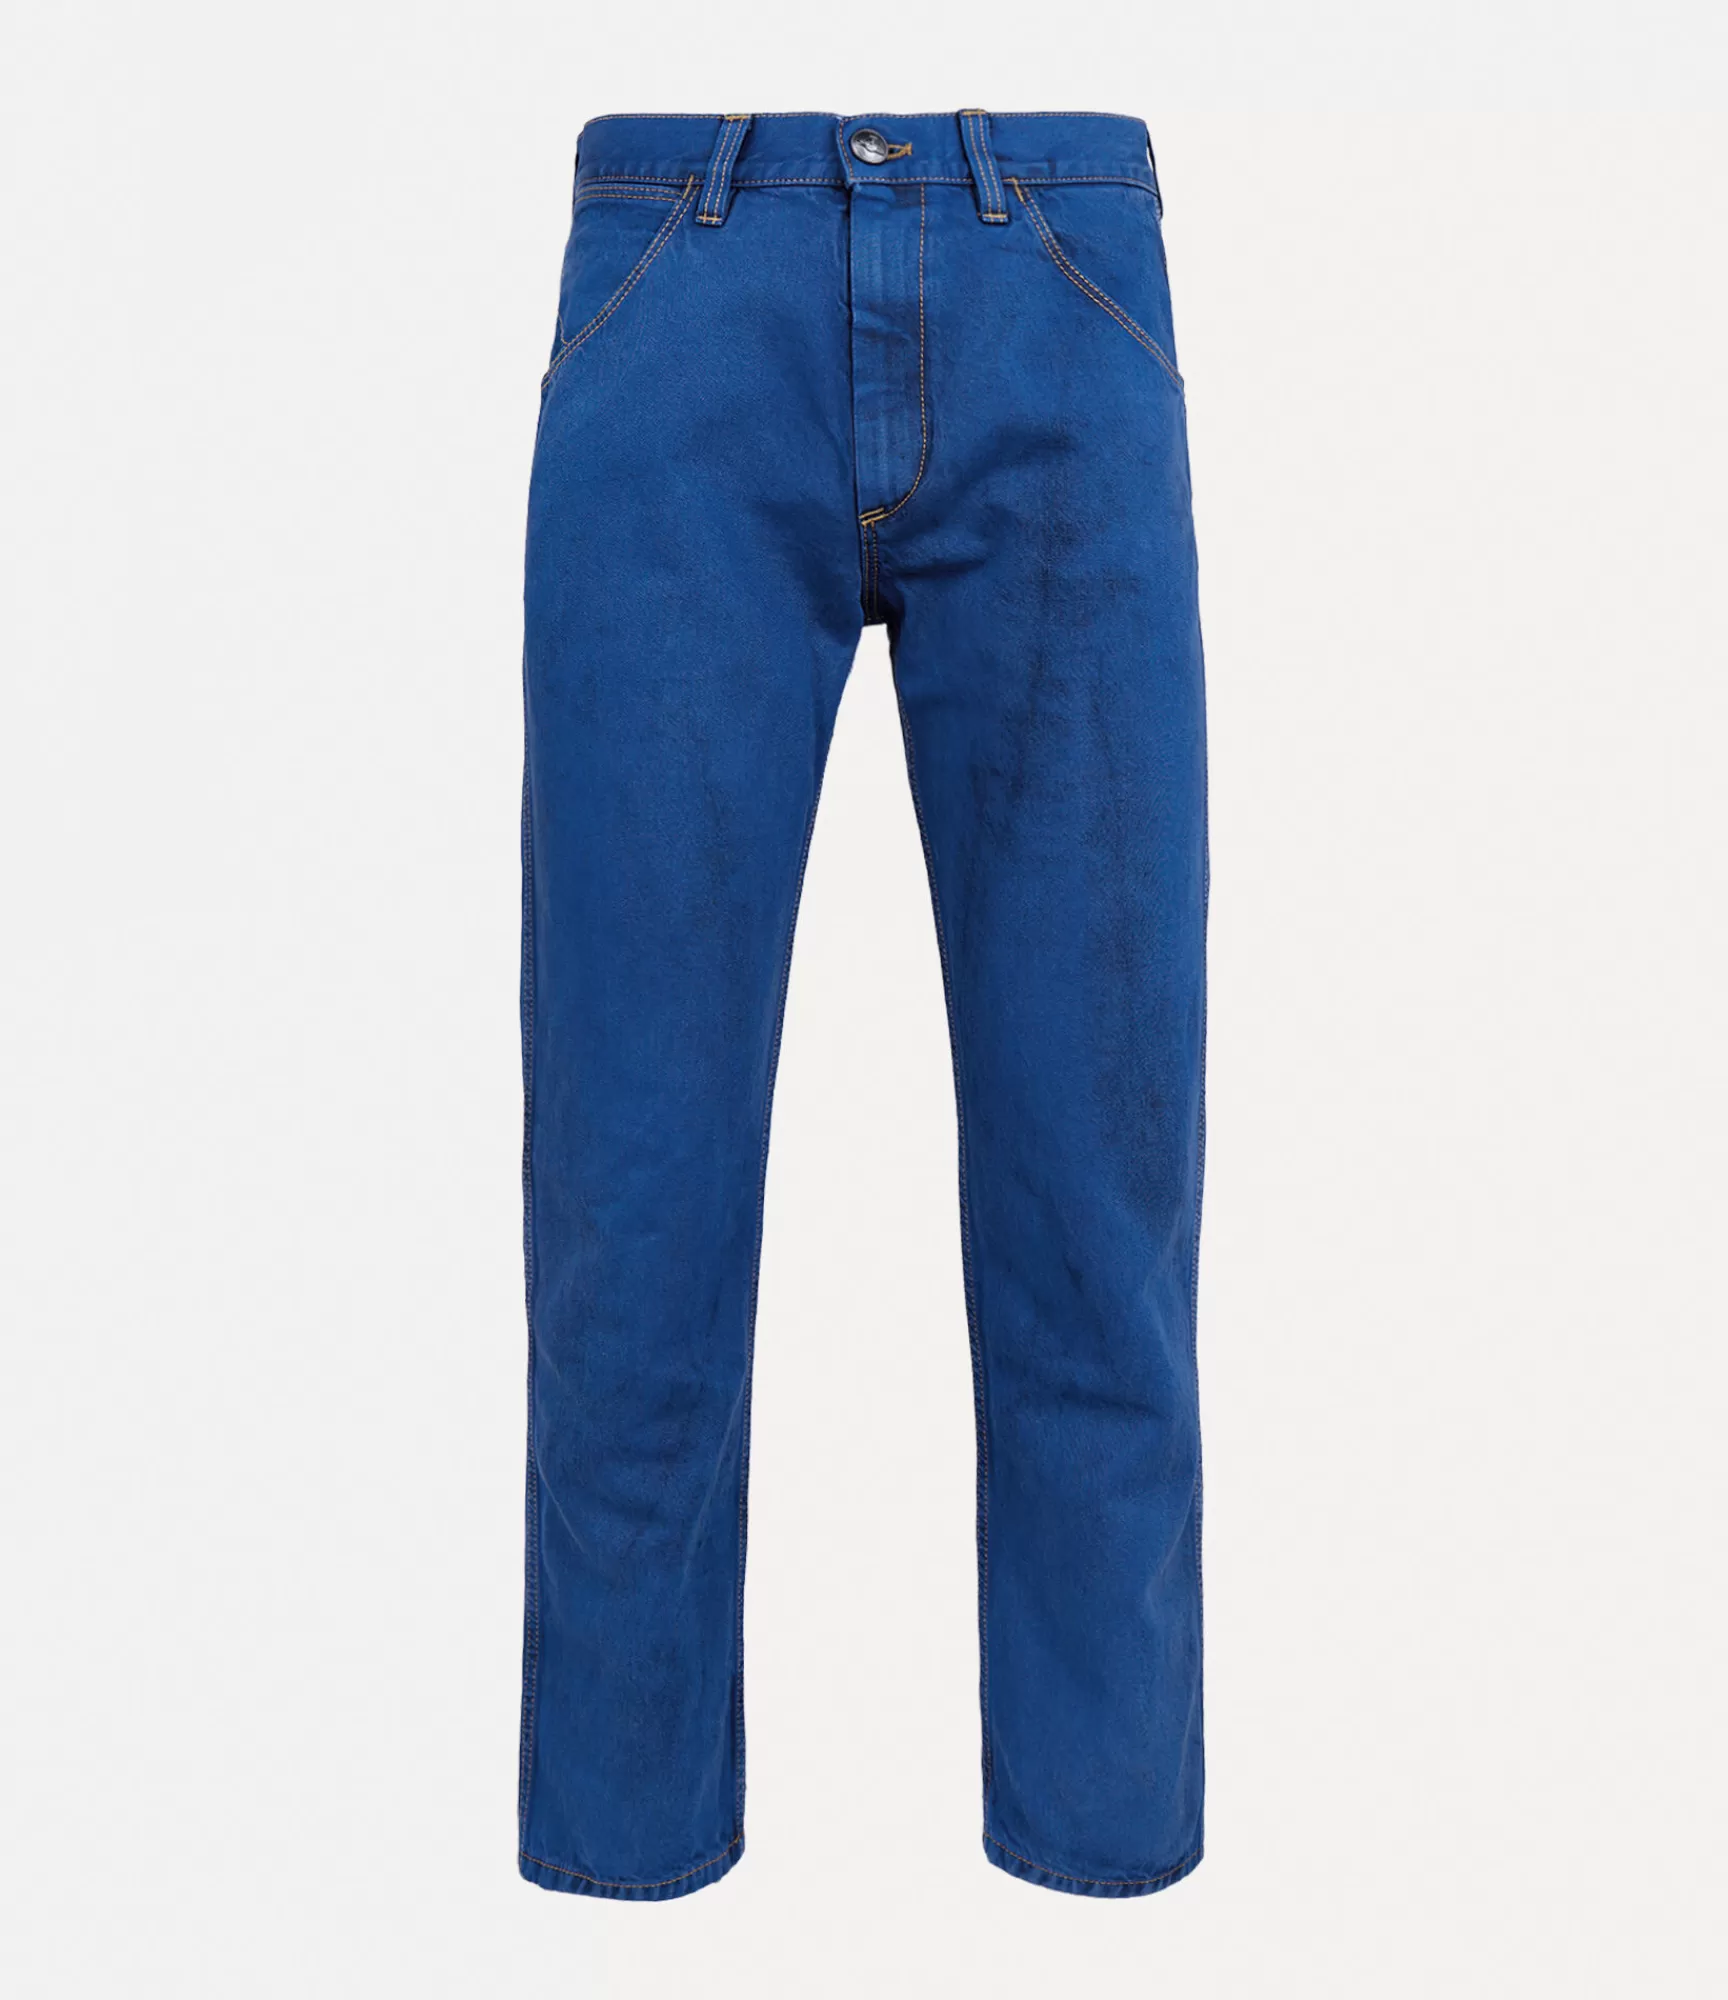 Vivienne Westwood Trousers and Shorts*Ranch jeans Blue